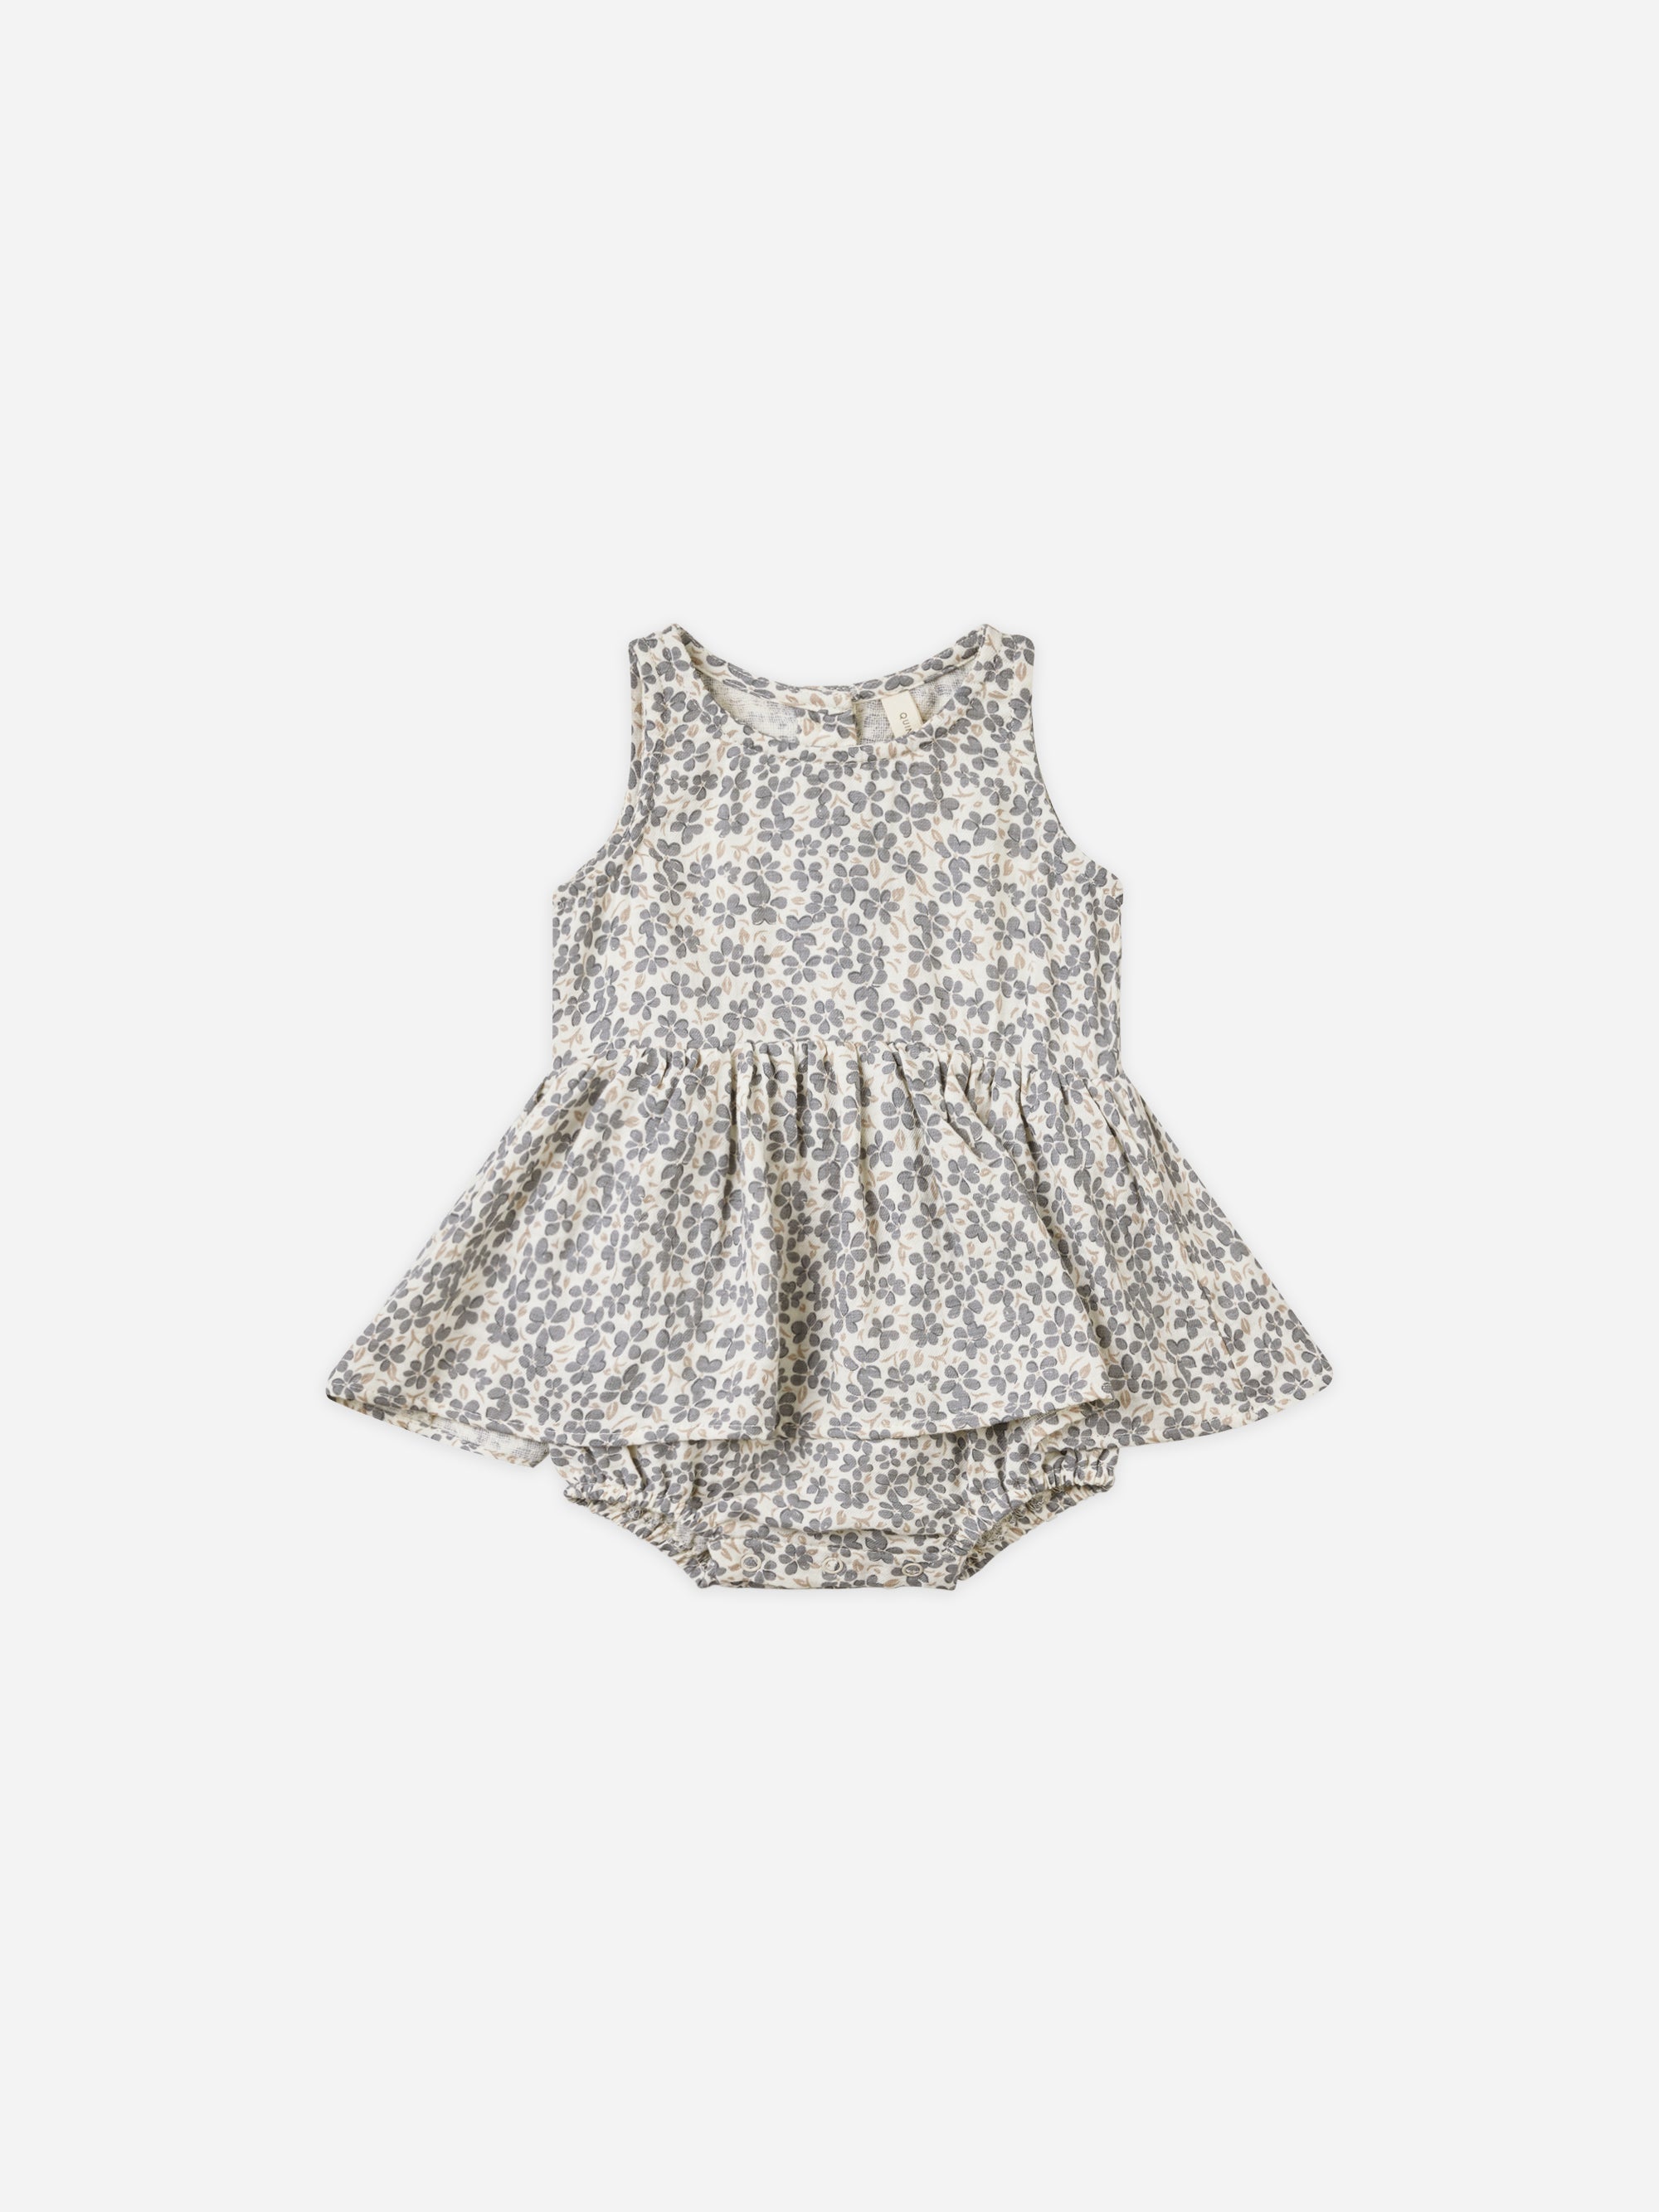 Skirted Tank Romper || Poppy - Rylee + Cru | Kids Clothes | Trendy Baby Clothes | Modern Infant Outfits |